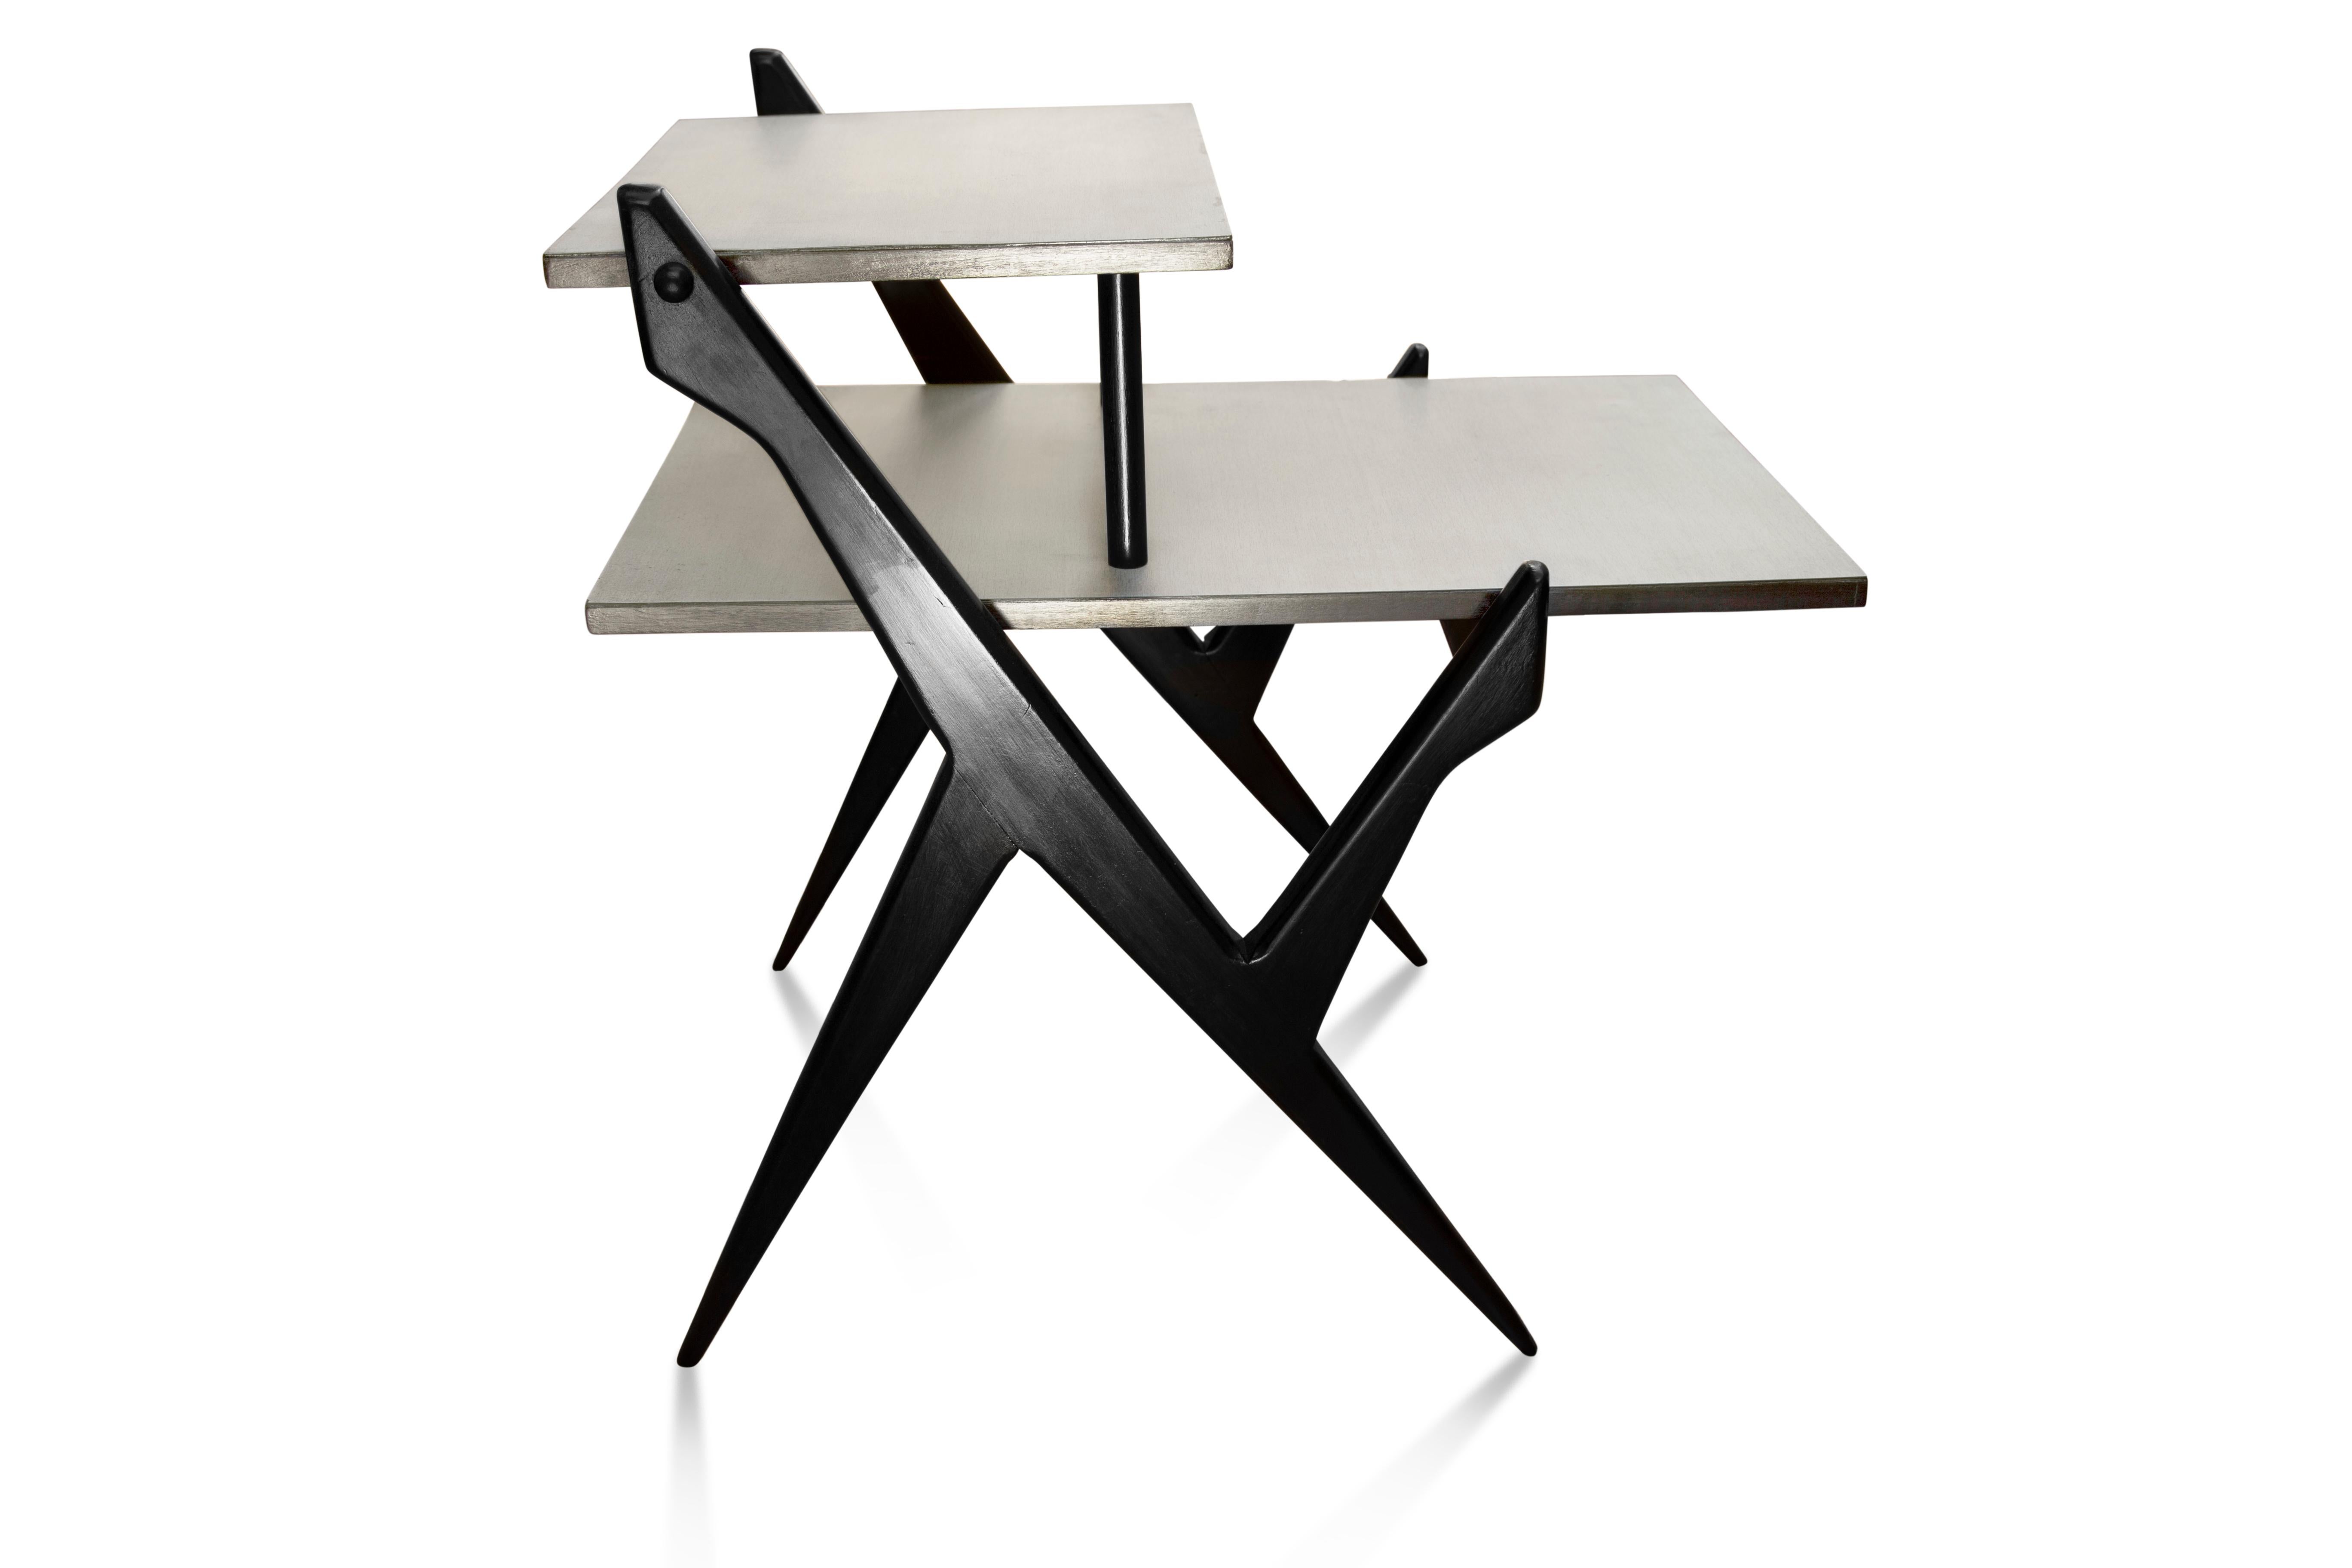 Mid-Century Modern Phone Table in Wood, Black & White, 1950s, Brazil For Sale 5